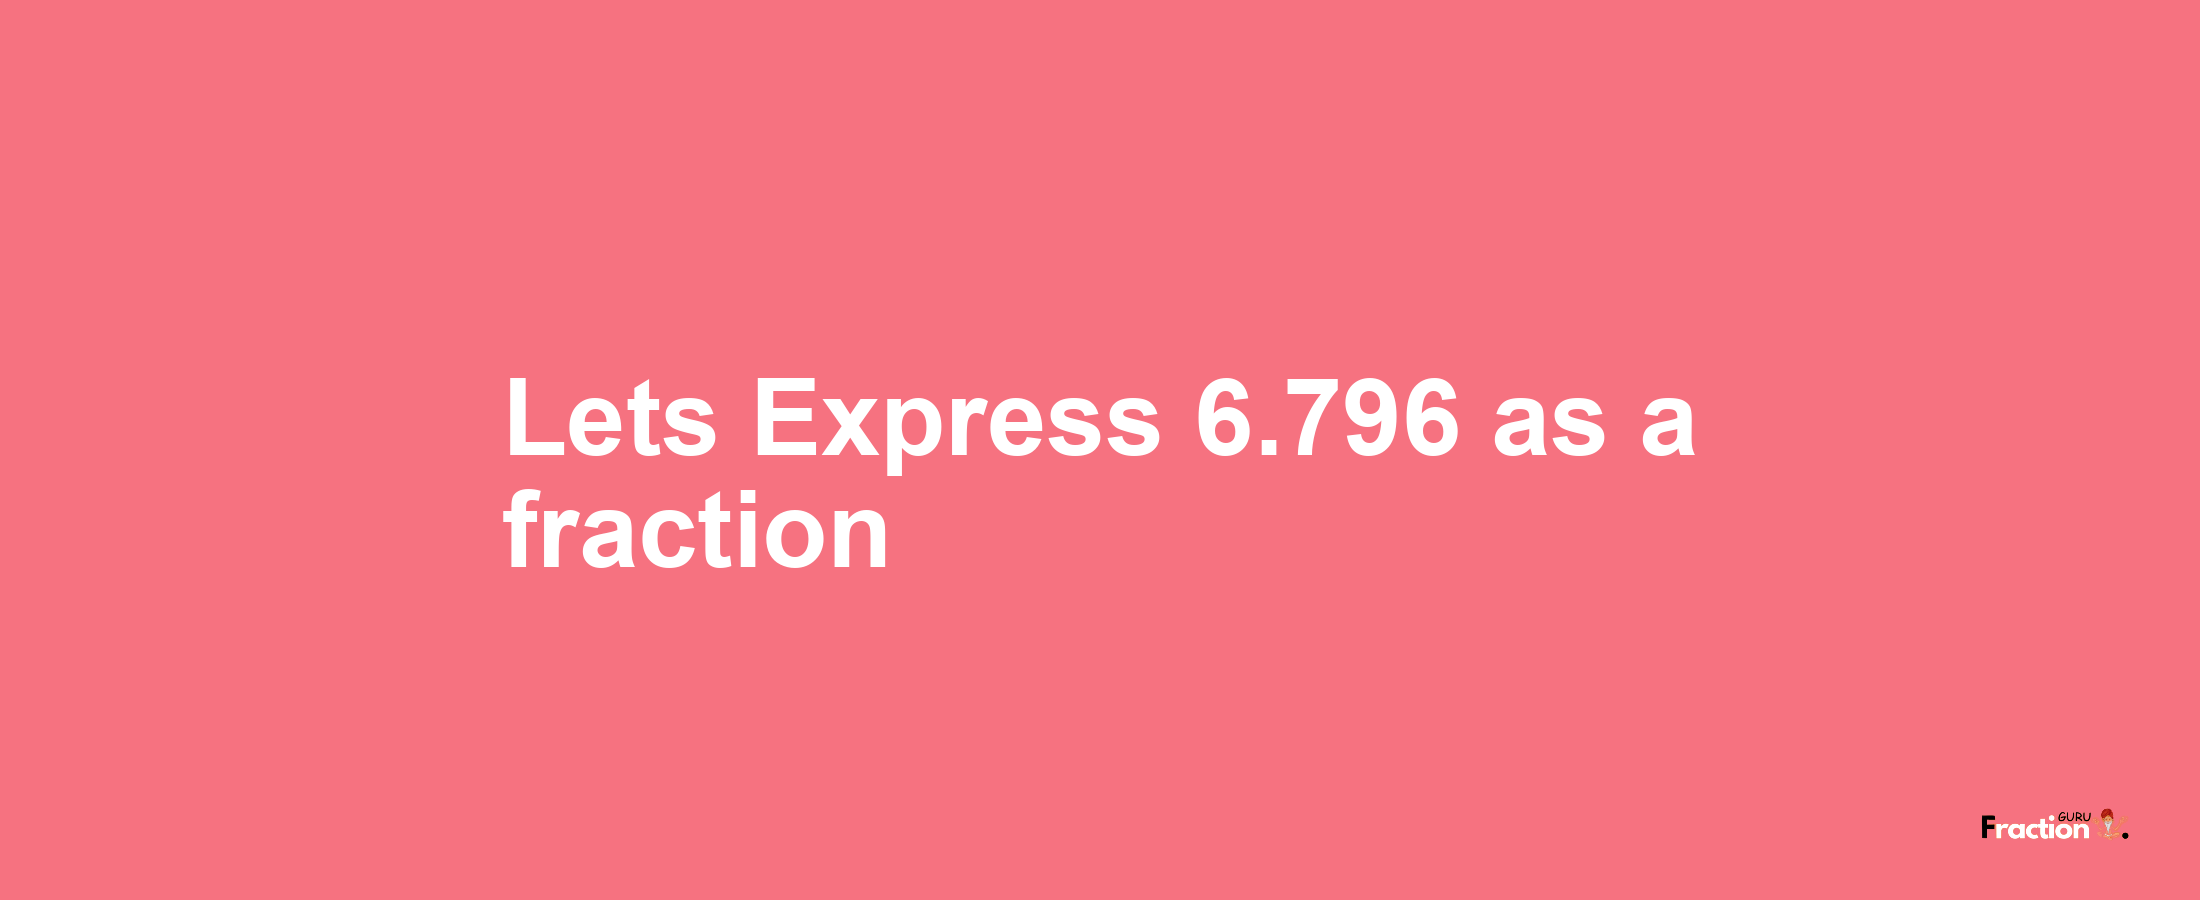 Lets Express 6.796 as afraction